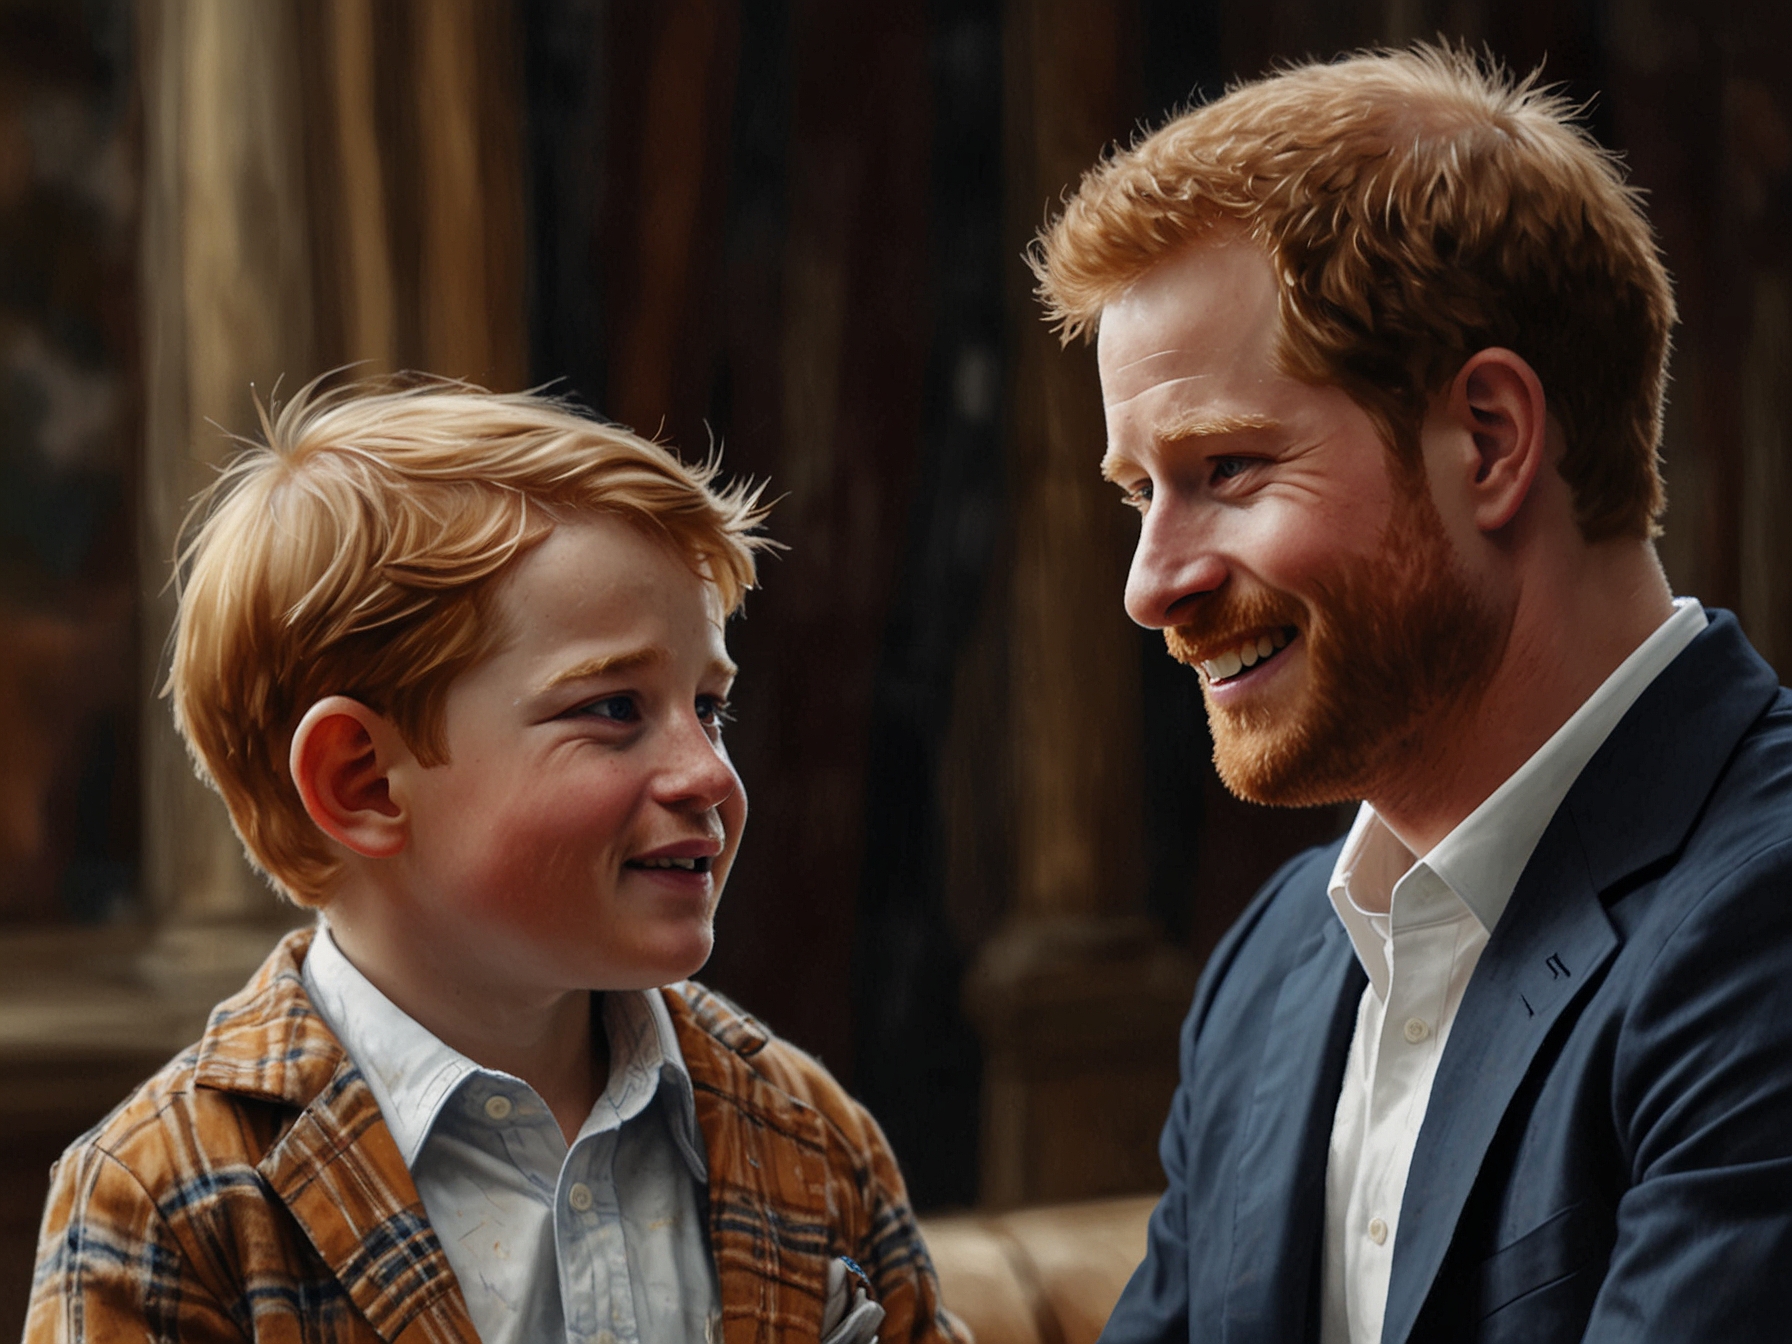 A candid moment between King Charles and Prince Harry, capturing the complex father-son relationship amid ongoing royal family tensions and public scrutiny.